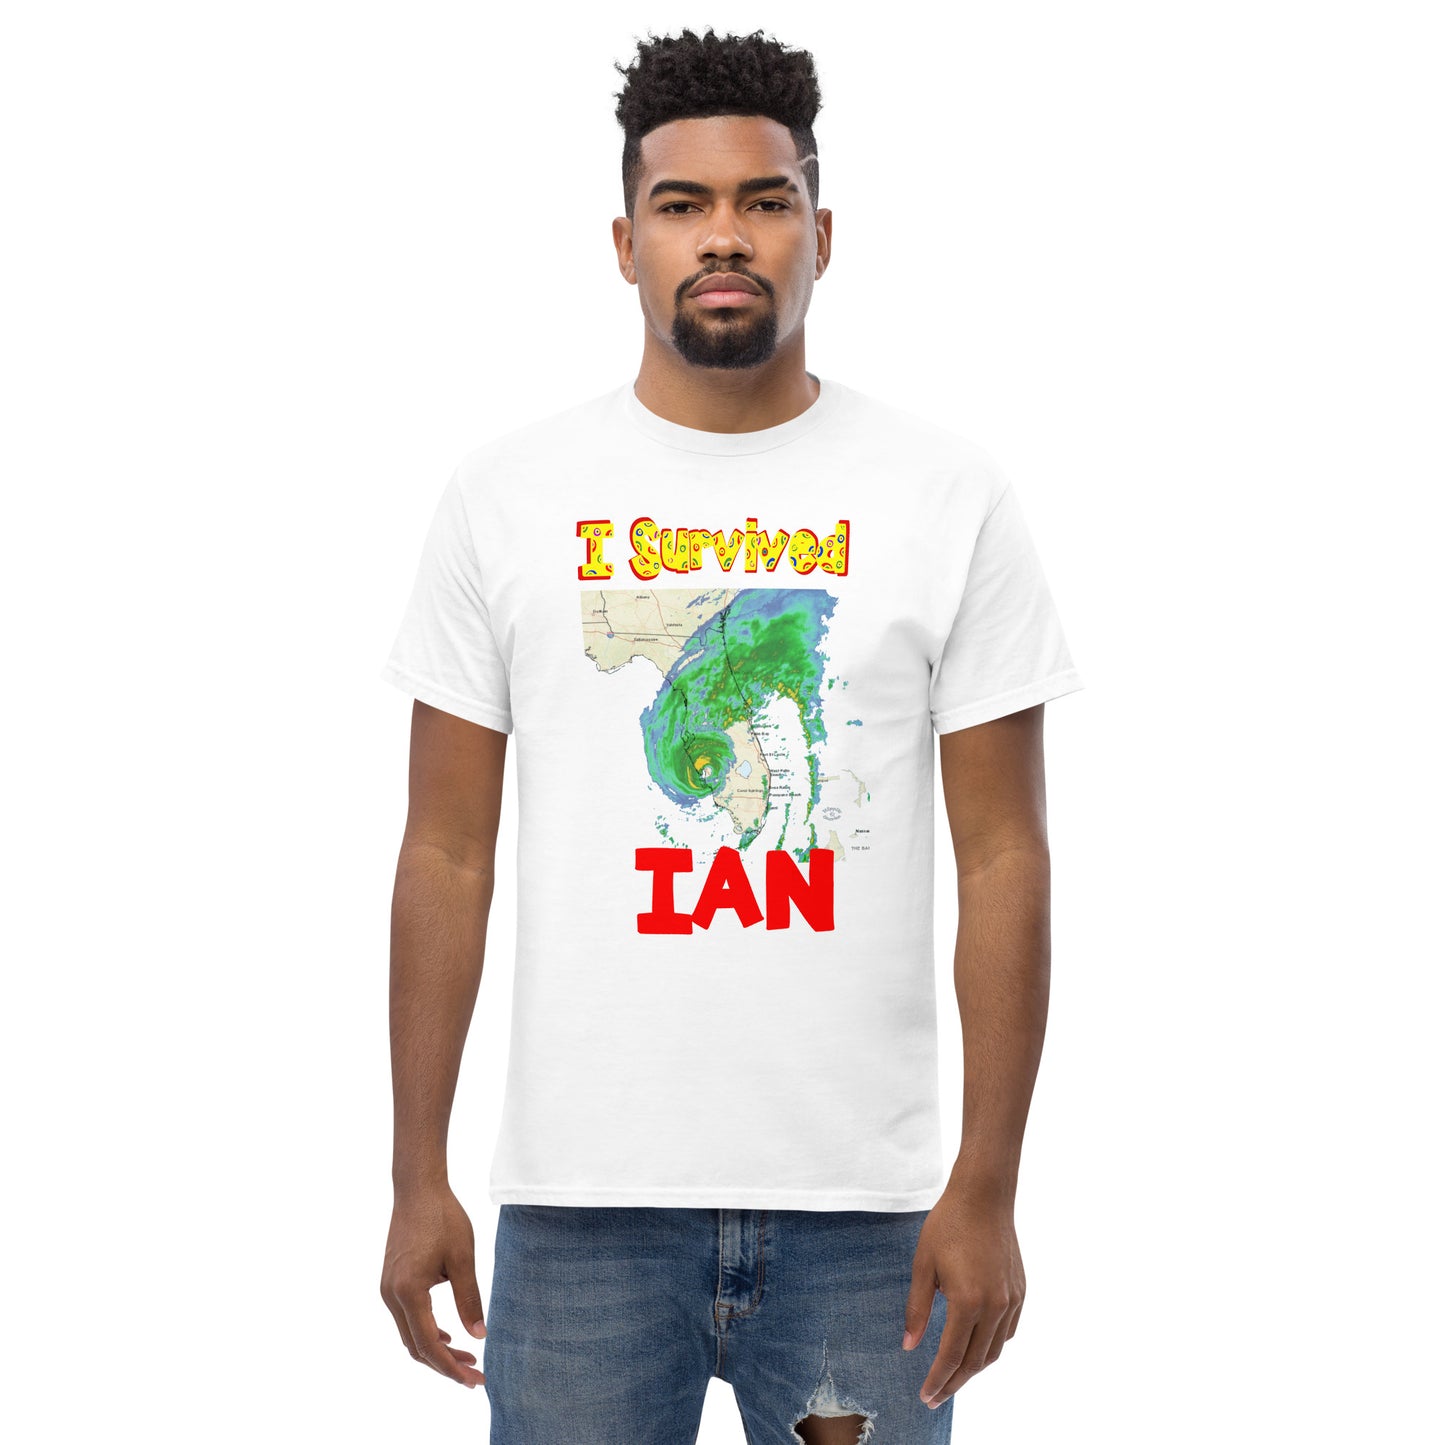 "I survived Hurricane Ian" with Hurricane Styled TextMen's classic tee